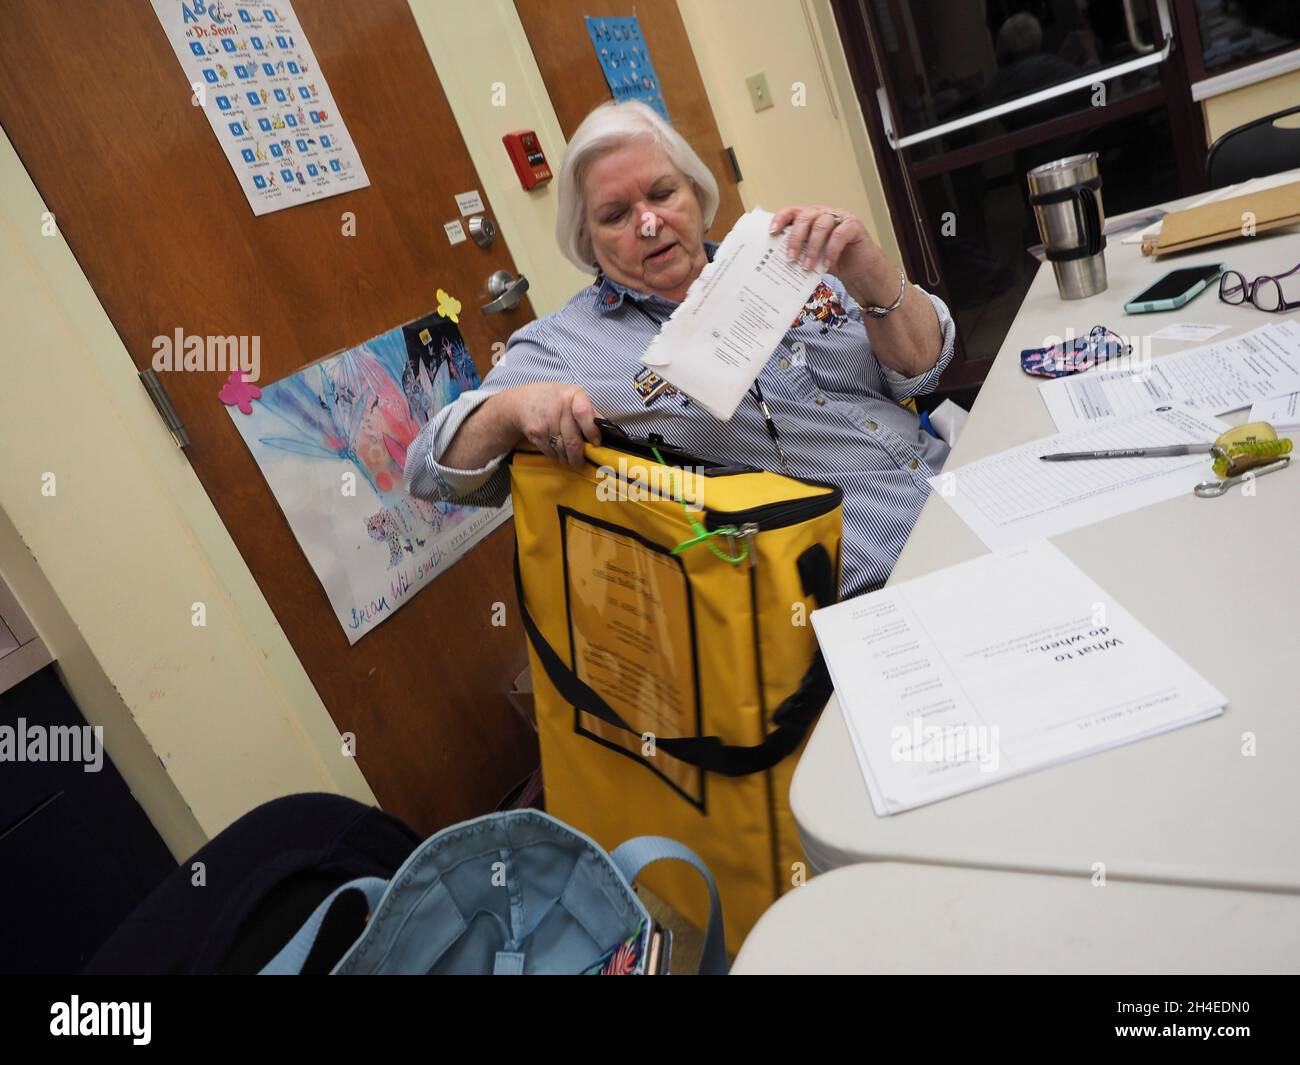 Ashland, Virginia, USA. 2nd Nov, 2021. The Precinct Chief places a spoiled absentee ballot into a secured pouch and then clears the voter to be able to vote in person. Polls opened for voting at 6am for the Virginia elections. (Credit Image: © Sue Dorfman/ZUMA Press Wire) Stock Photo